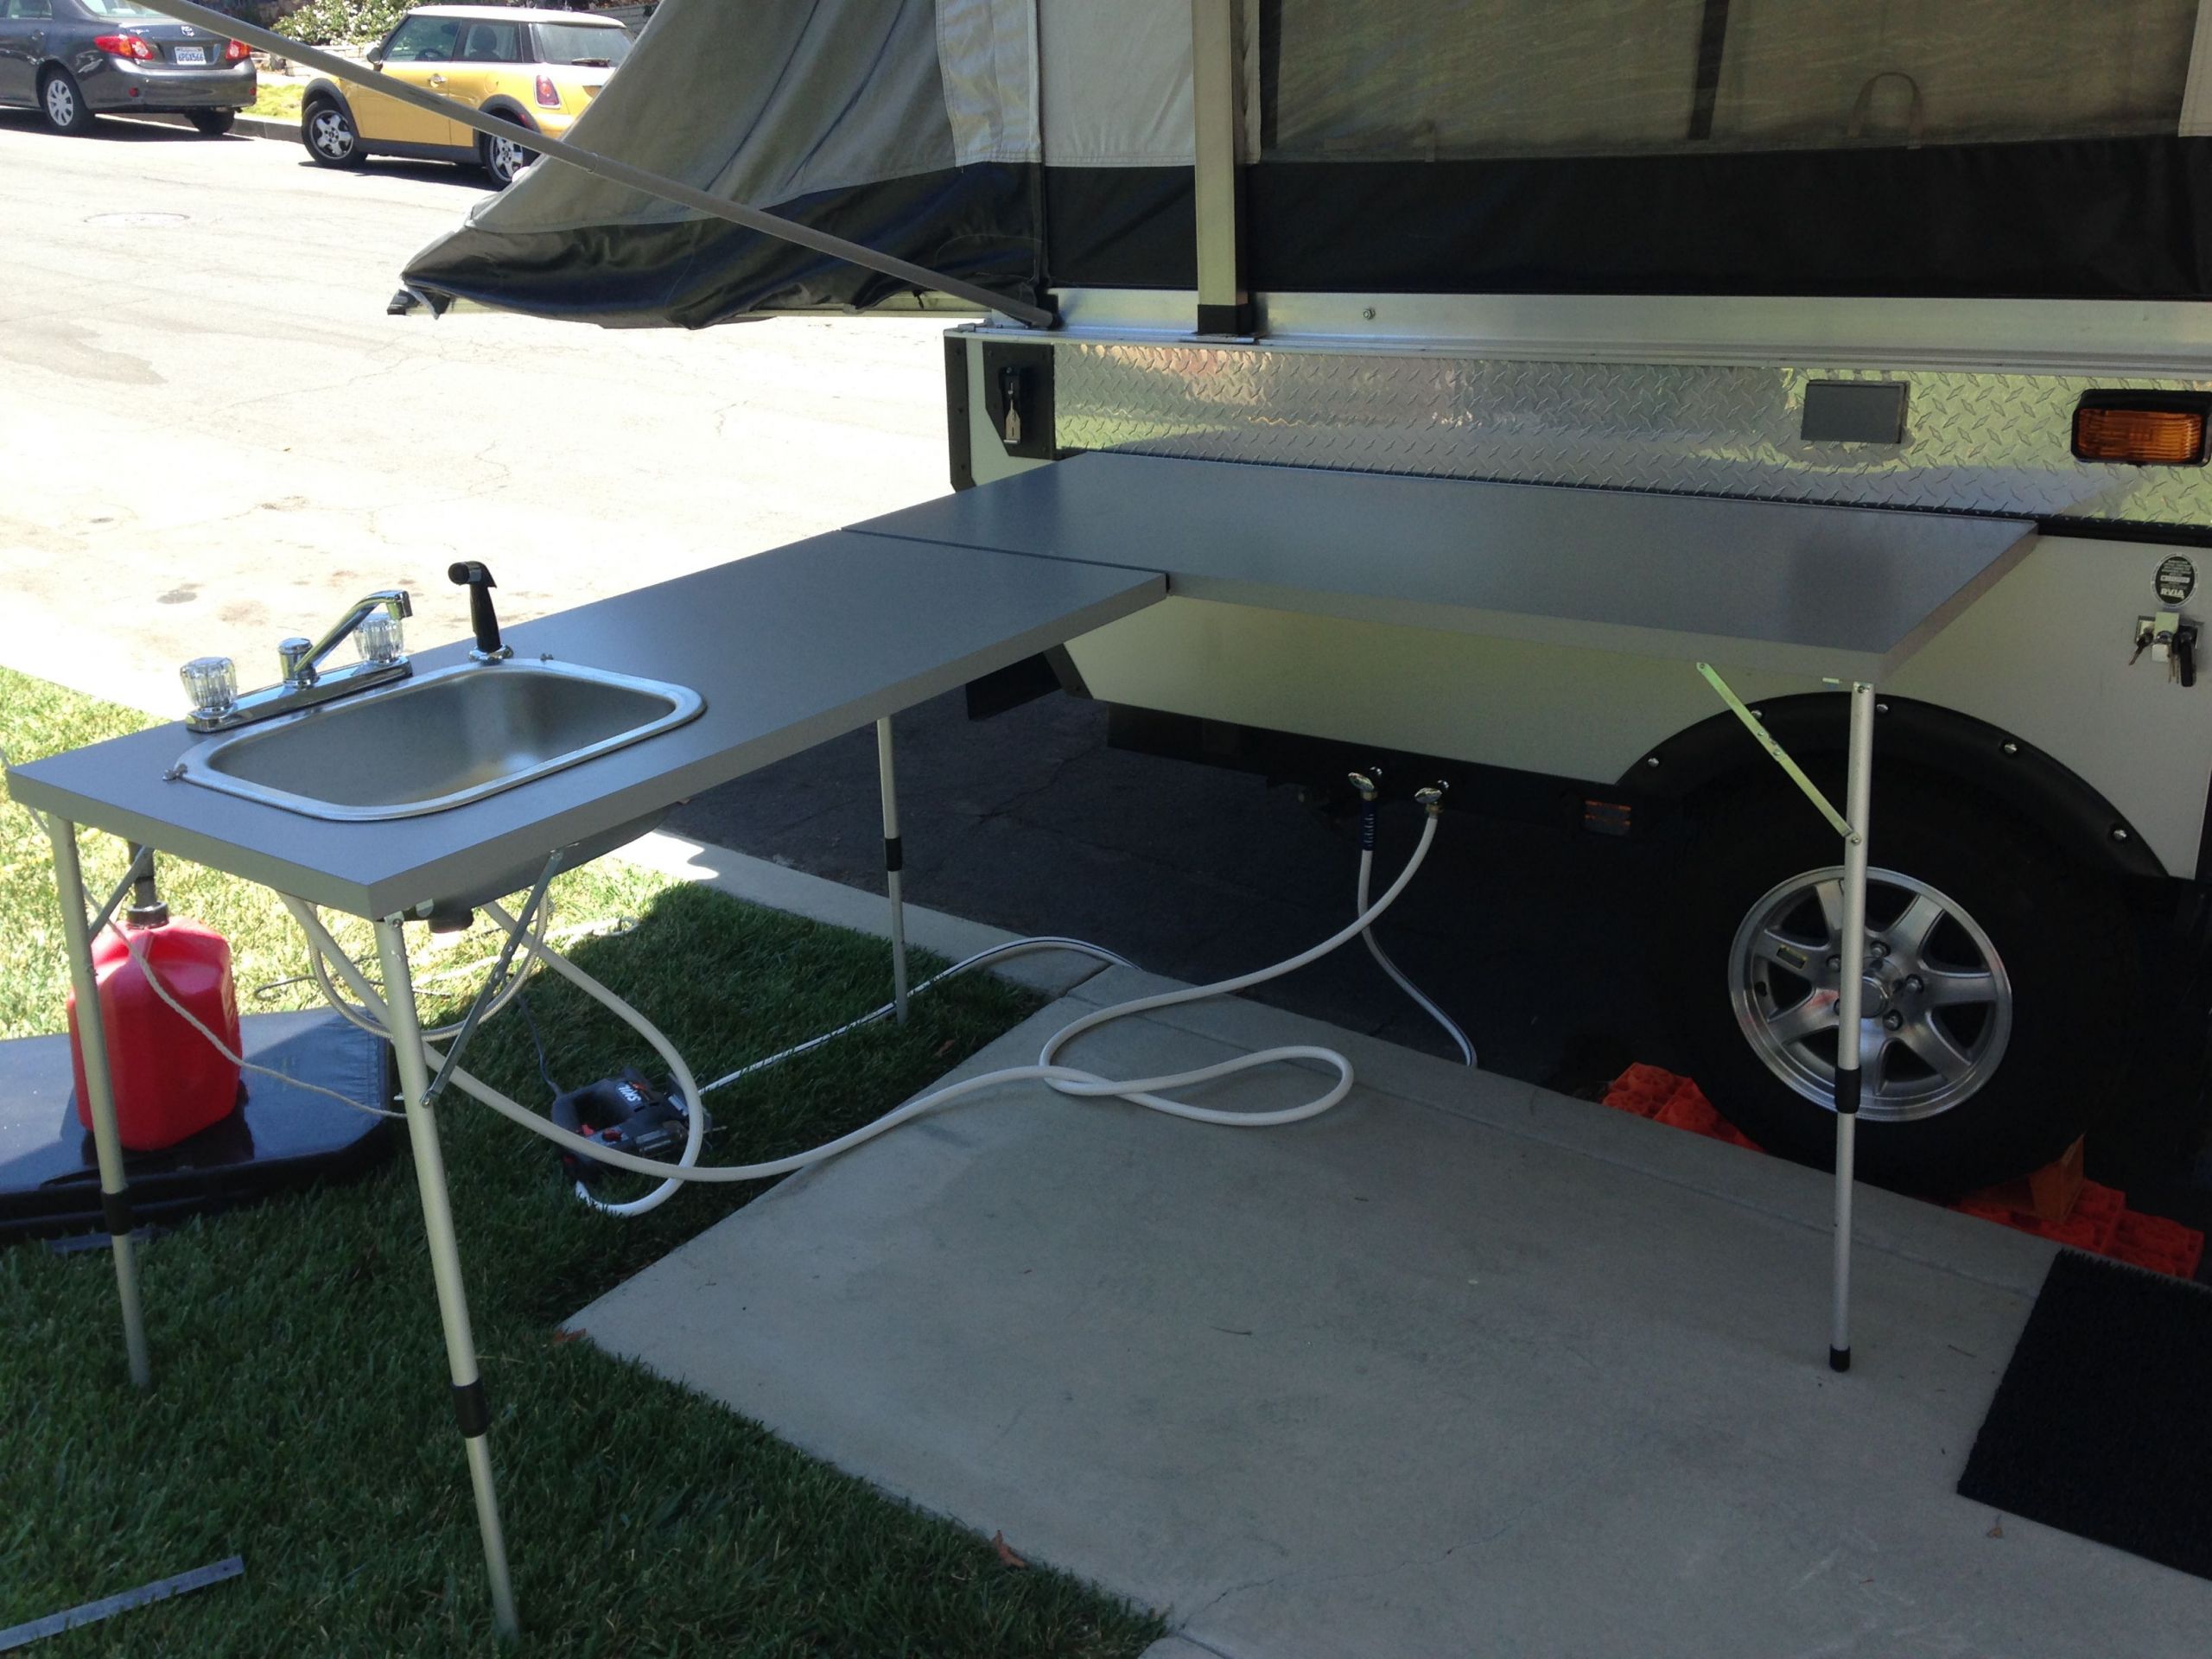 DIY Rv Outdoor Kitchen
 Awesome outdoor camp kitchen I love this idea